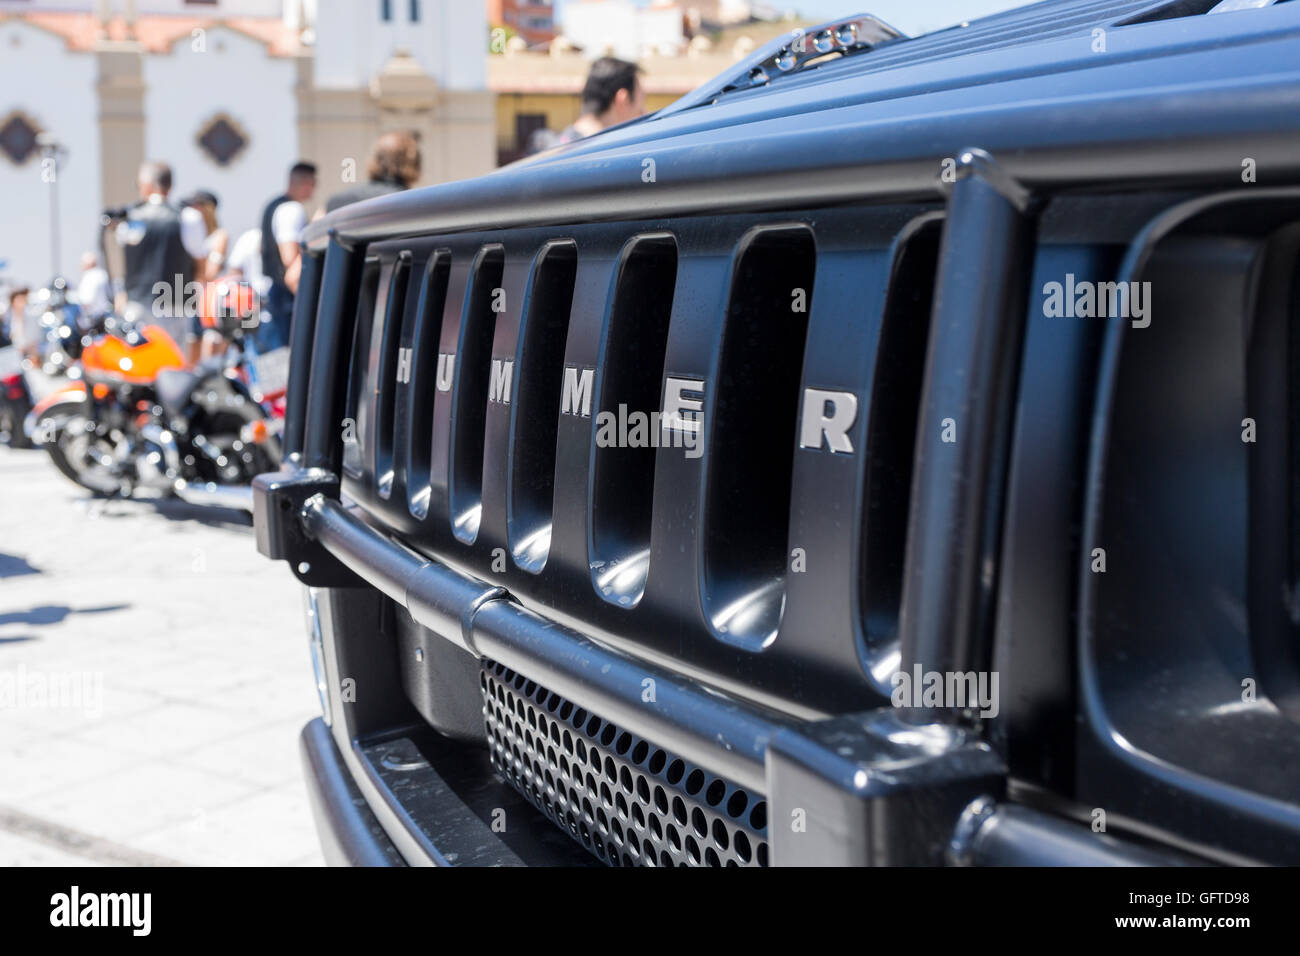 General Motors Hummer SUV in the Plaza in candelaria, tenerife Stock Photo